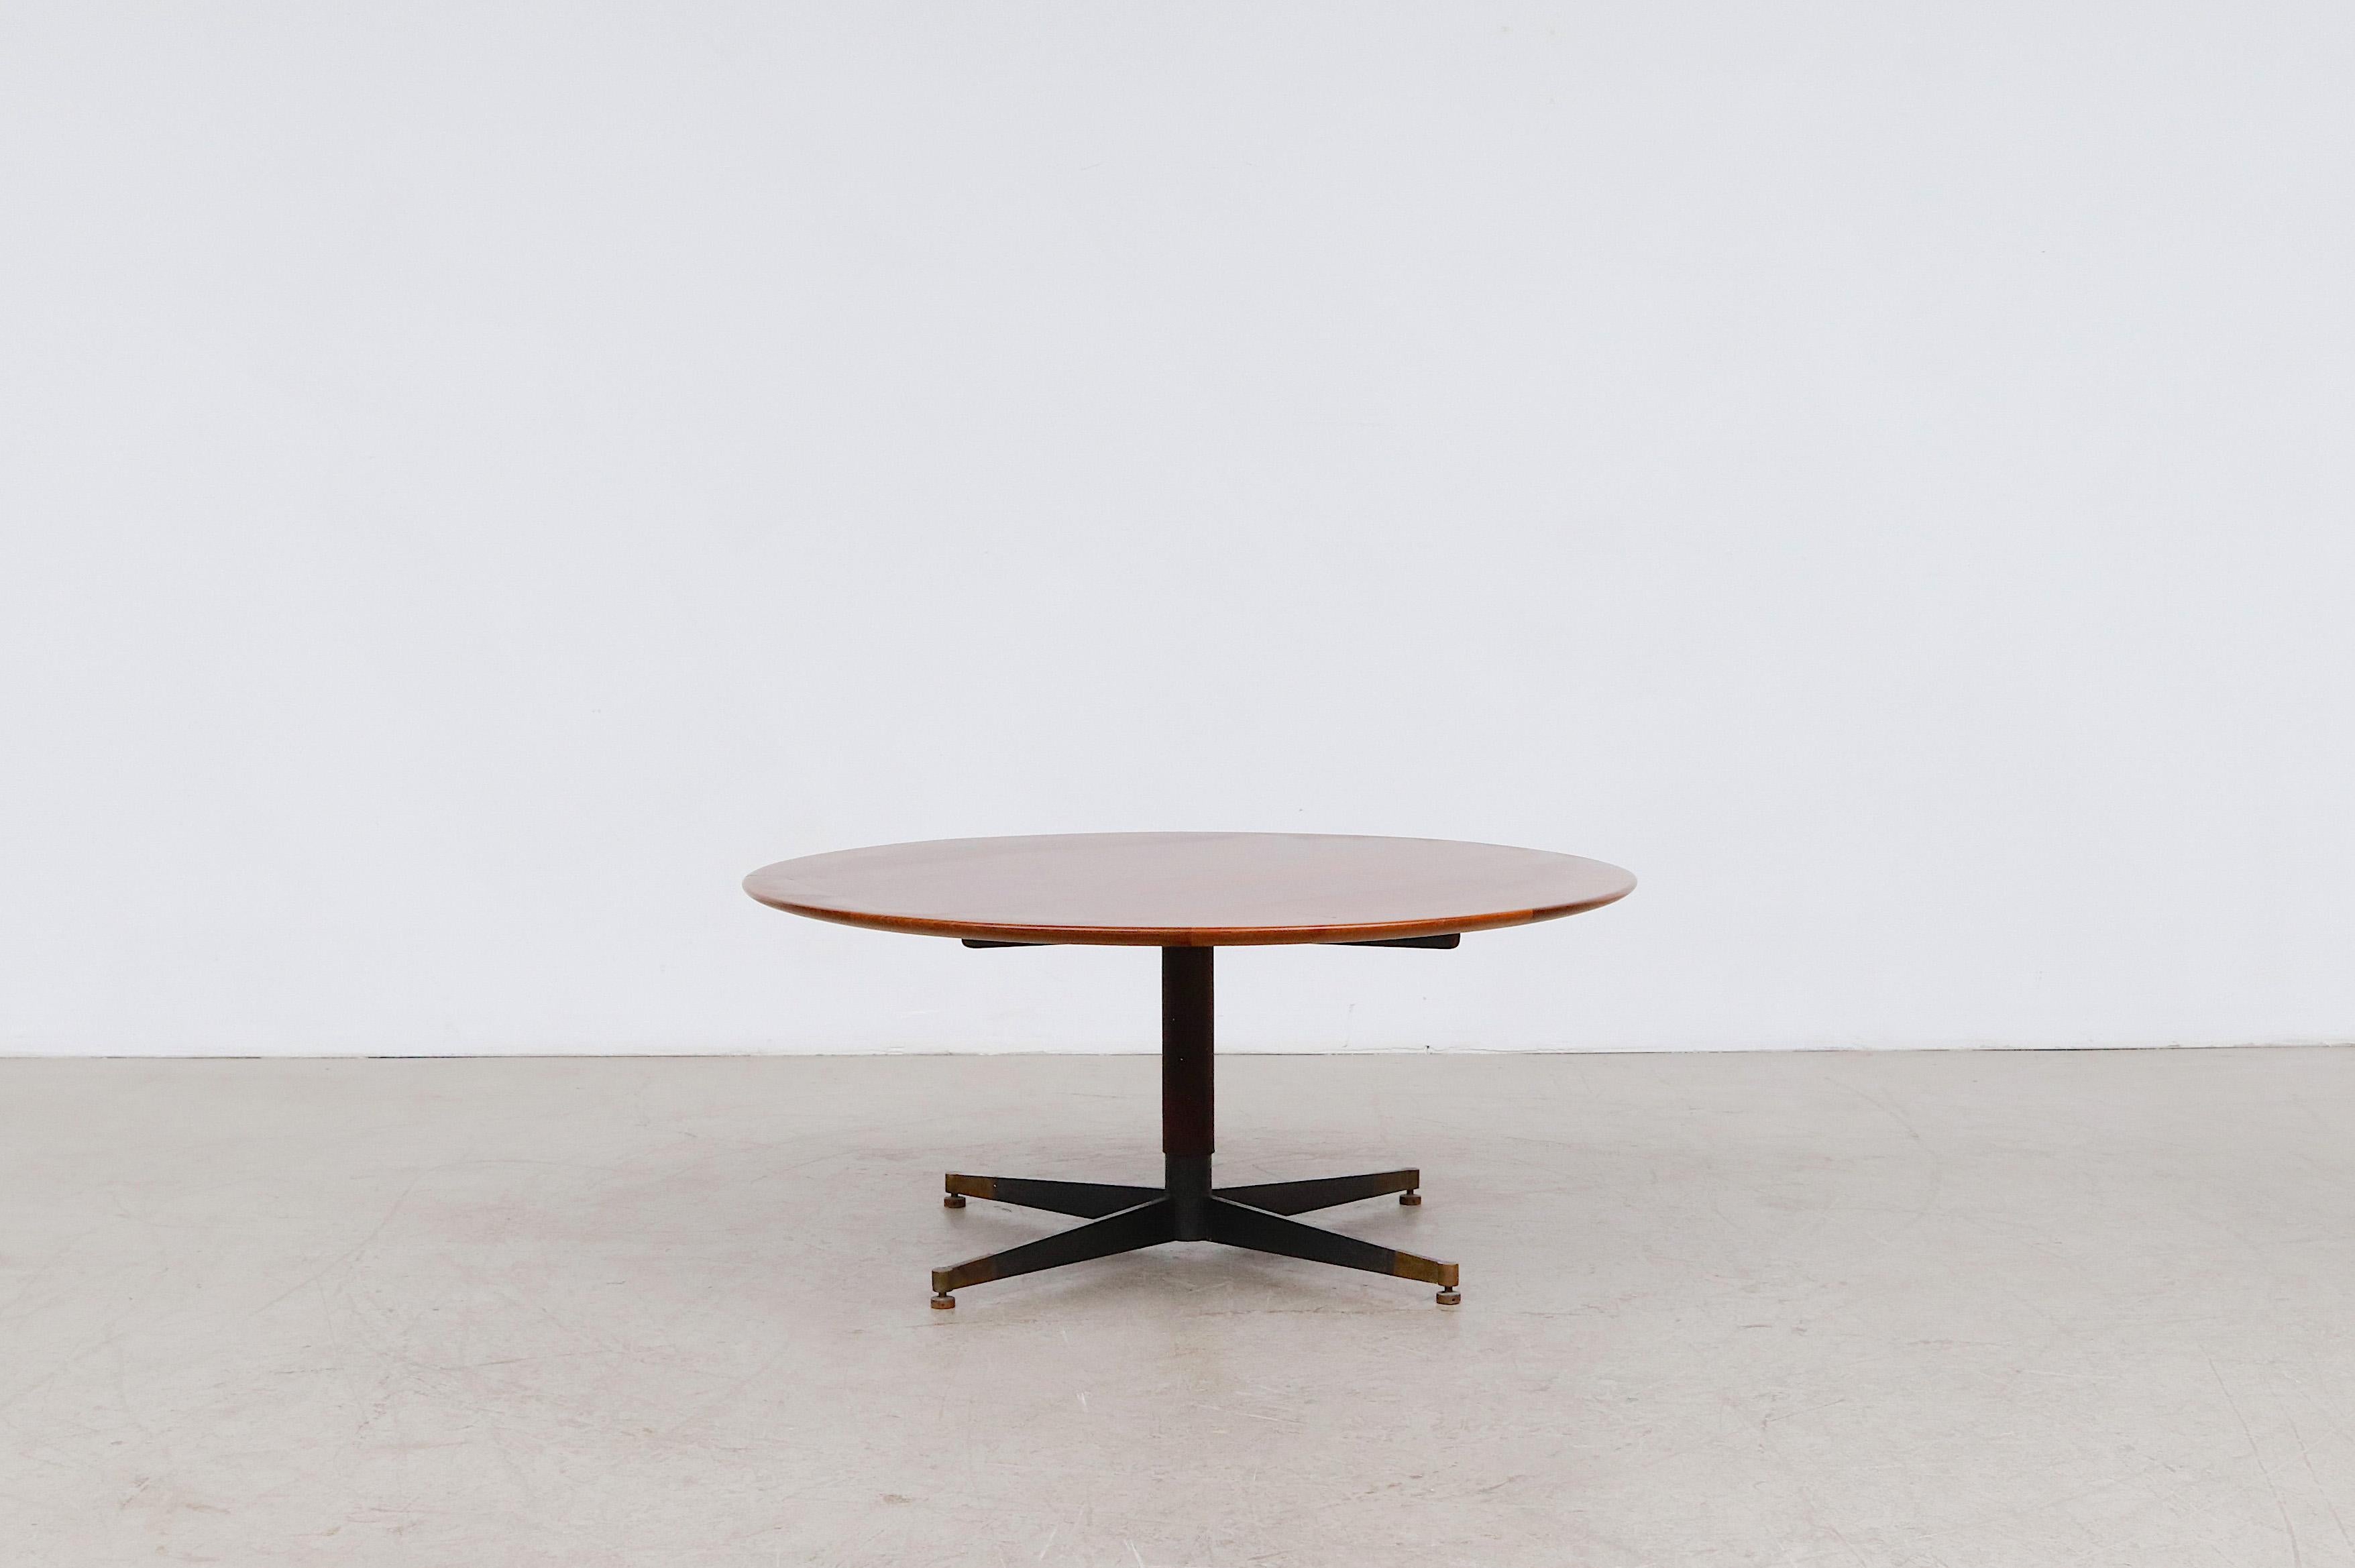 Beautiful mid-century Jacques Adnet attributed round side or coffee table with leather wrapped metal pedestal base. Lovely teak top with beautiful wood grain, leather wrapped post and patinated brass feet. In original condition with some base wear